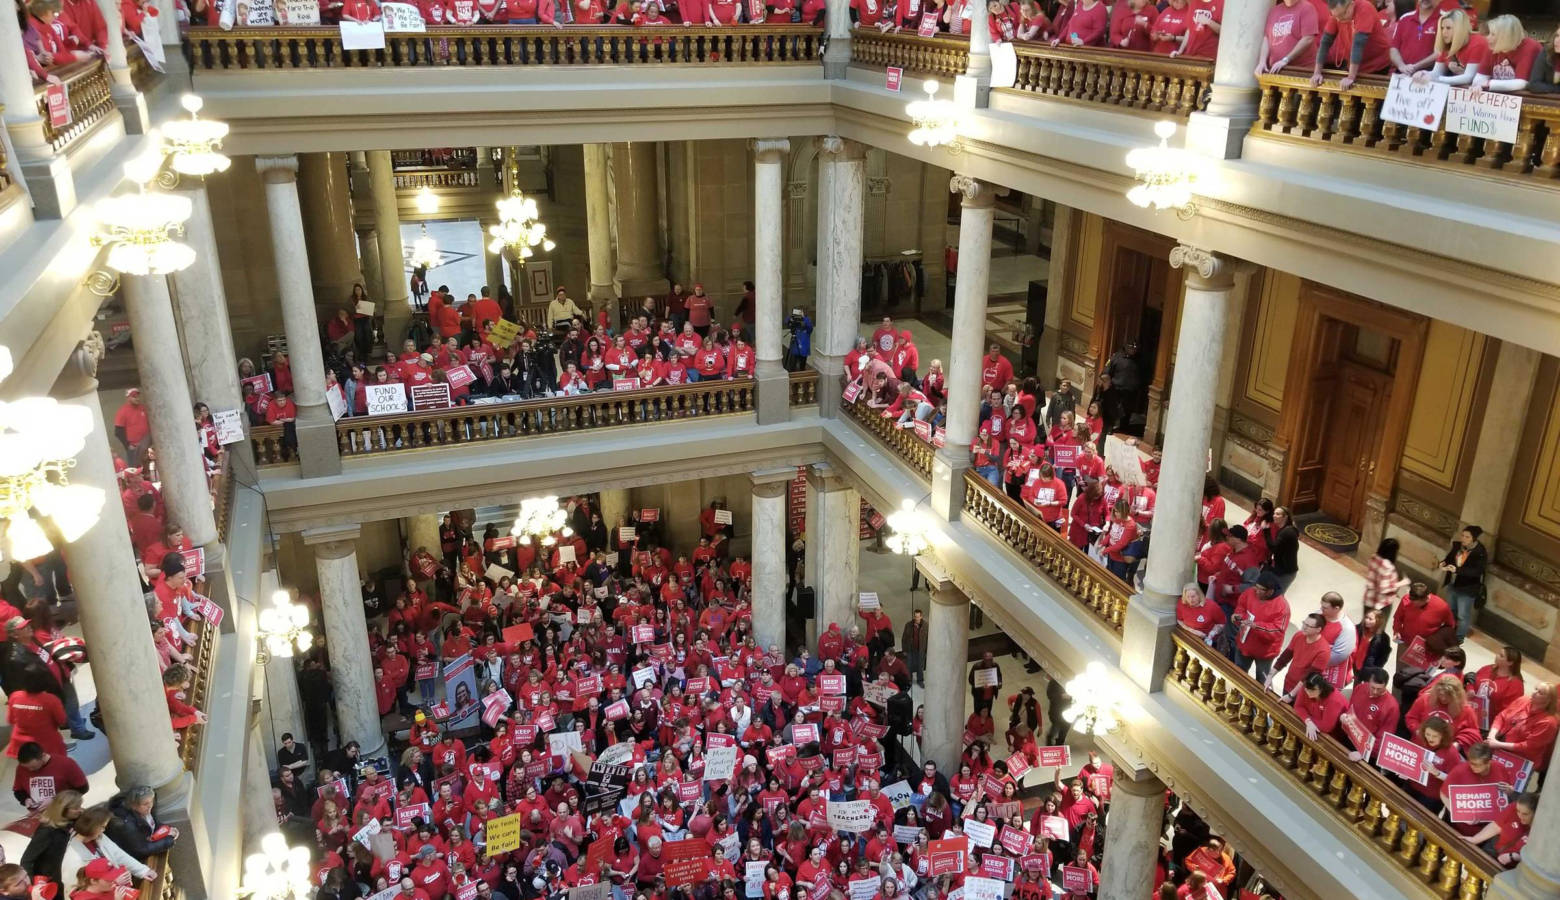 Teachers have rallied at the statehouse this year to press for better pay and more respect for their profession. (Jeanie Lindsay/IPB News)